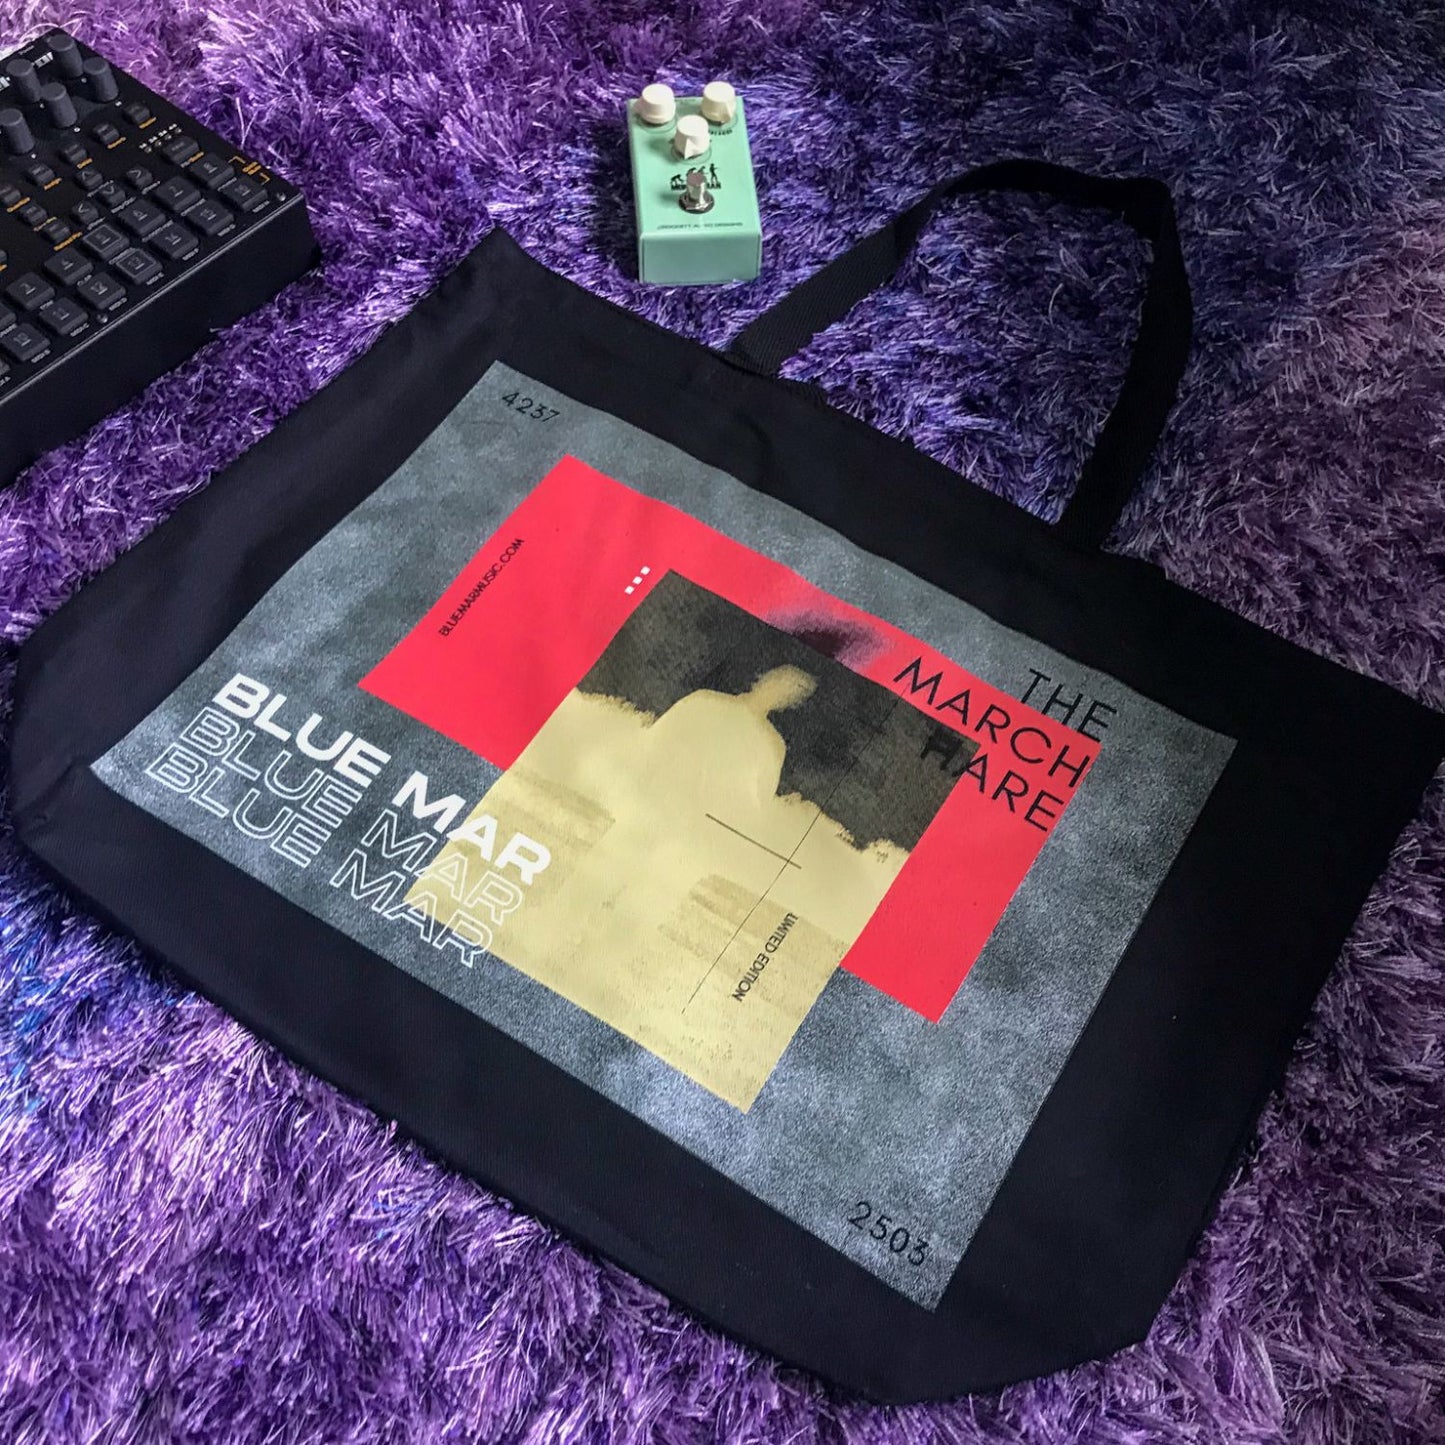 The March Hare Canvas Tote. One of a kind, limited edition, canvas tote bag, individually screenprinted with extra TLC.  PRODUCT DETAILS. 100% cotton  49cm x 38cm Art size 15” wide 